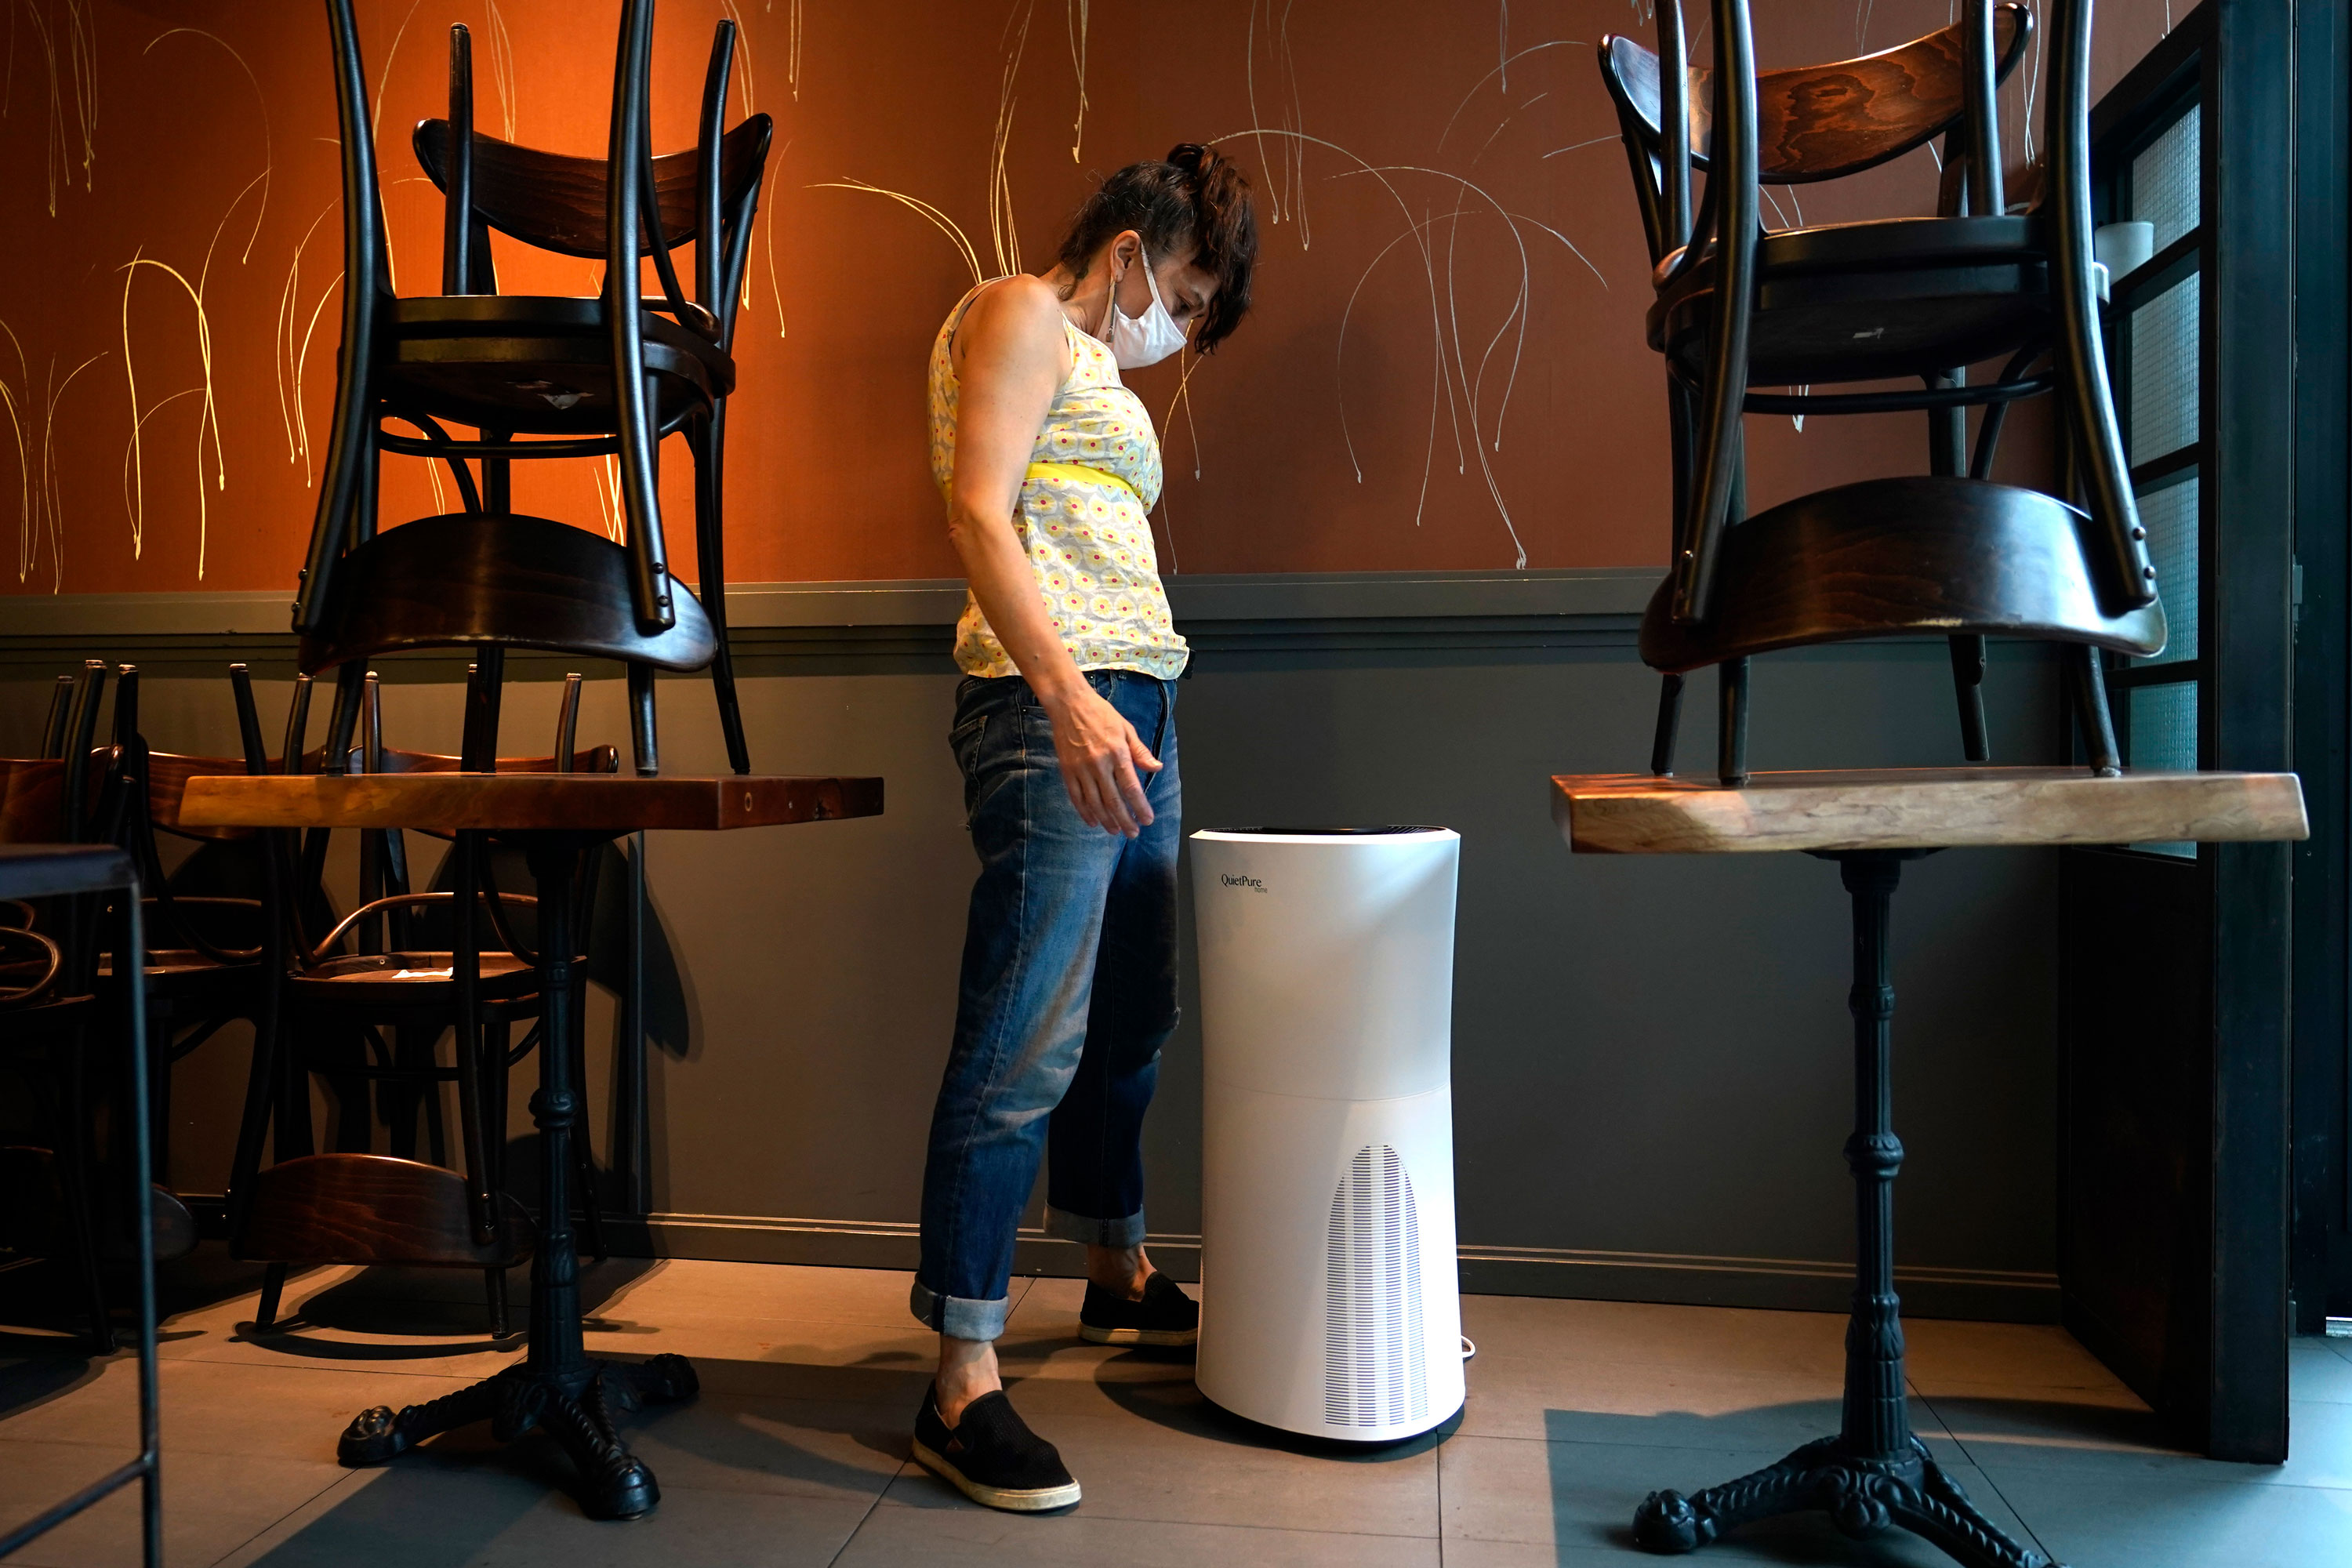 Samantha DiStefano, owner of Mama Fox, looks at an air purifier on September 29 in Brooklyn, New York. She'll need the air purifier when she opens the indoor portion of her restaurant and bar.